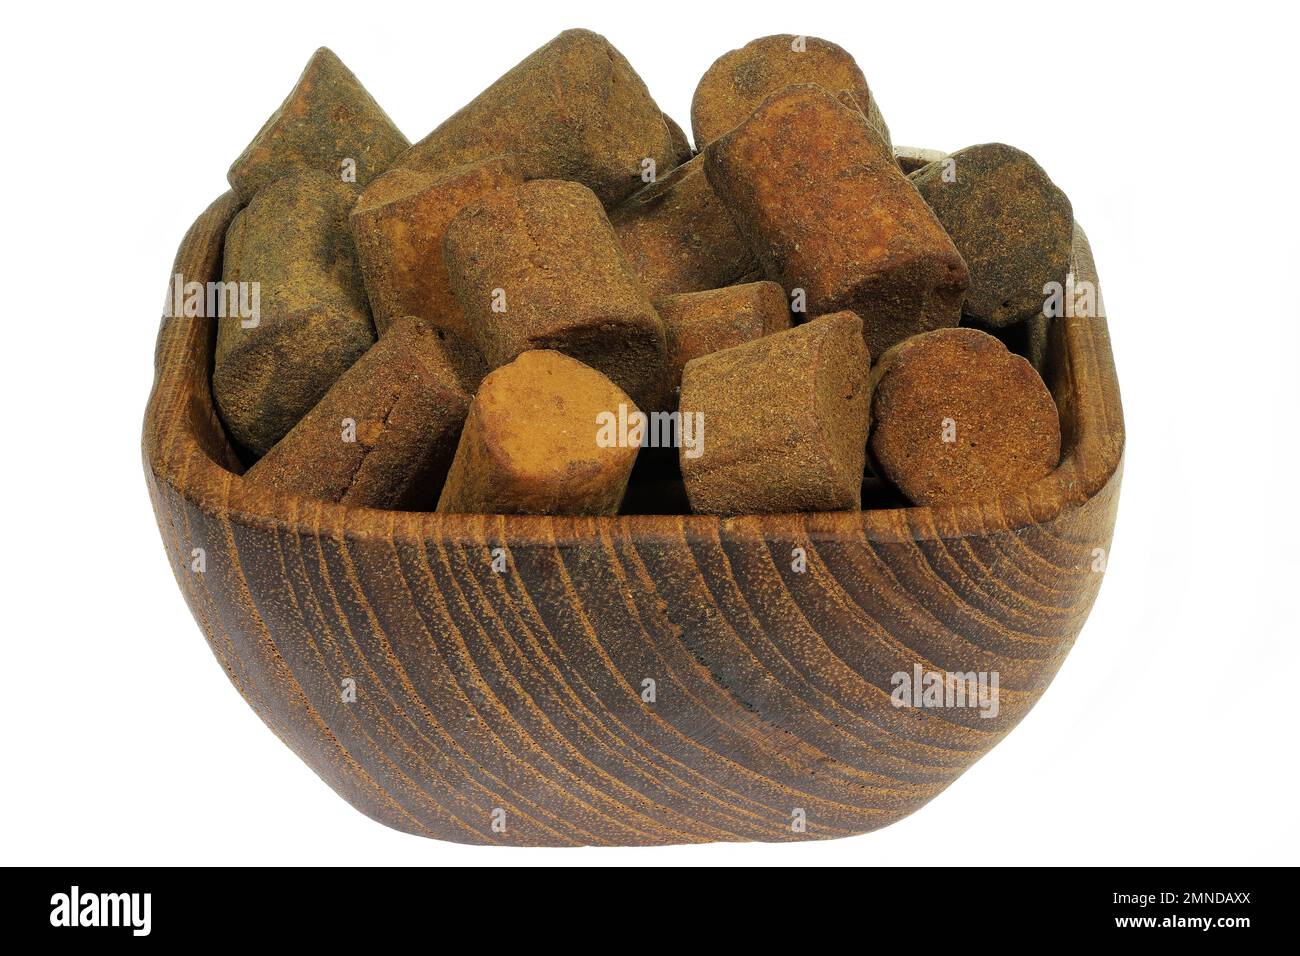 Dutch cinnamon candy sticks in a teakwood bowl isolated on white background Stock Photo